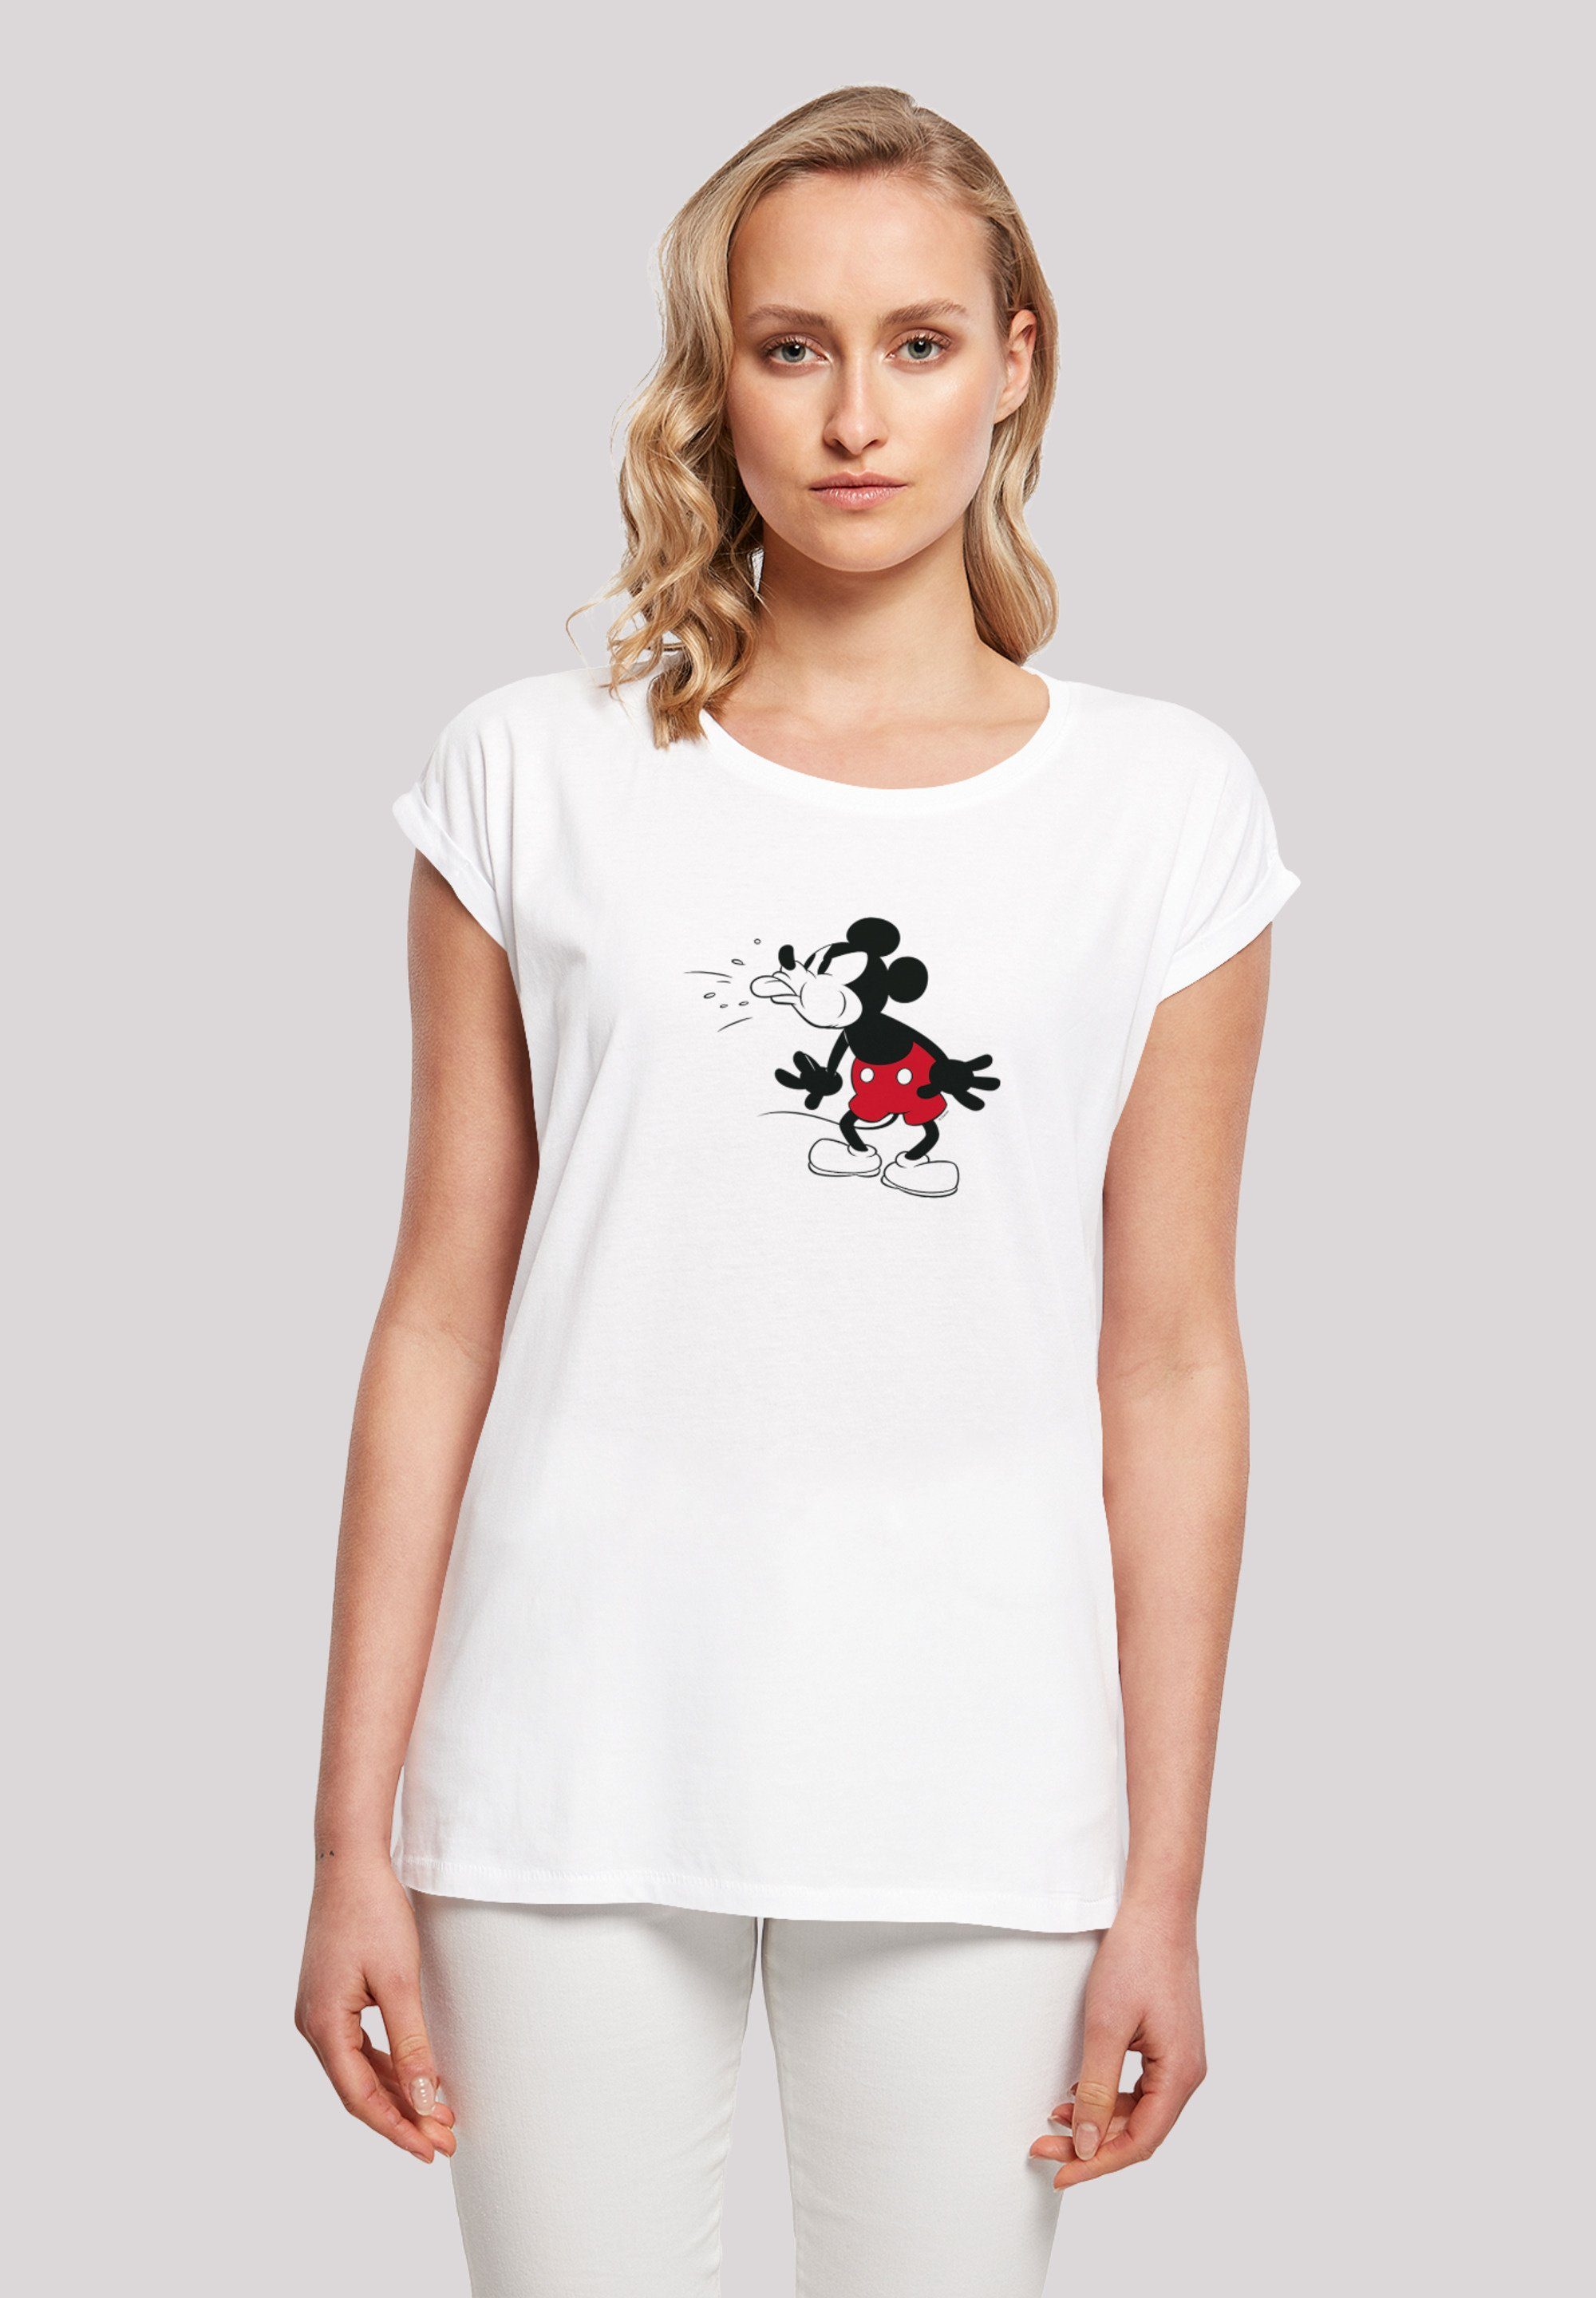 Print Disney T-Shirt Mouse Mickey Vintage Maus F4NT4STIC Classic Micky